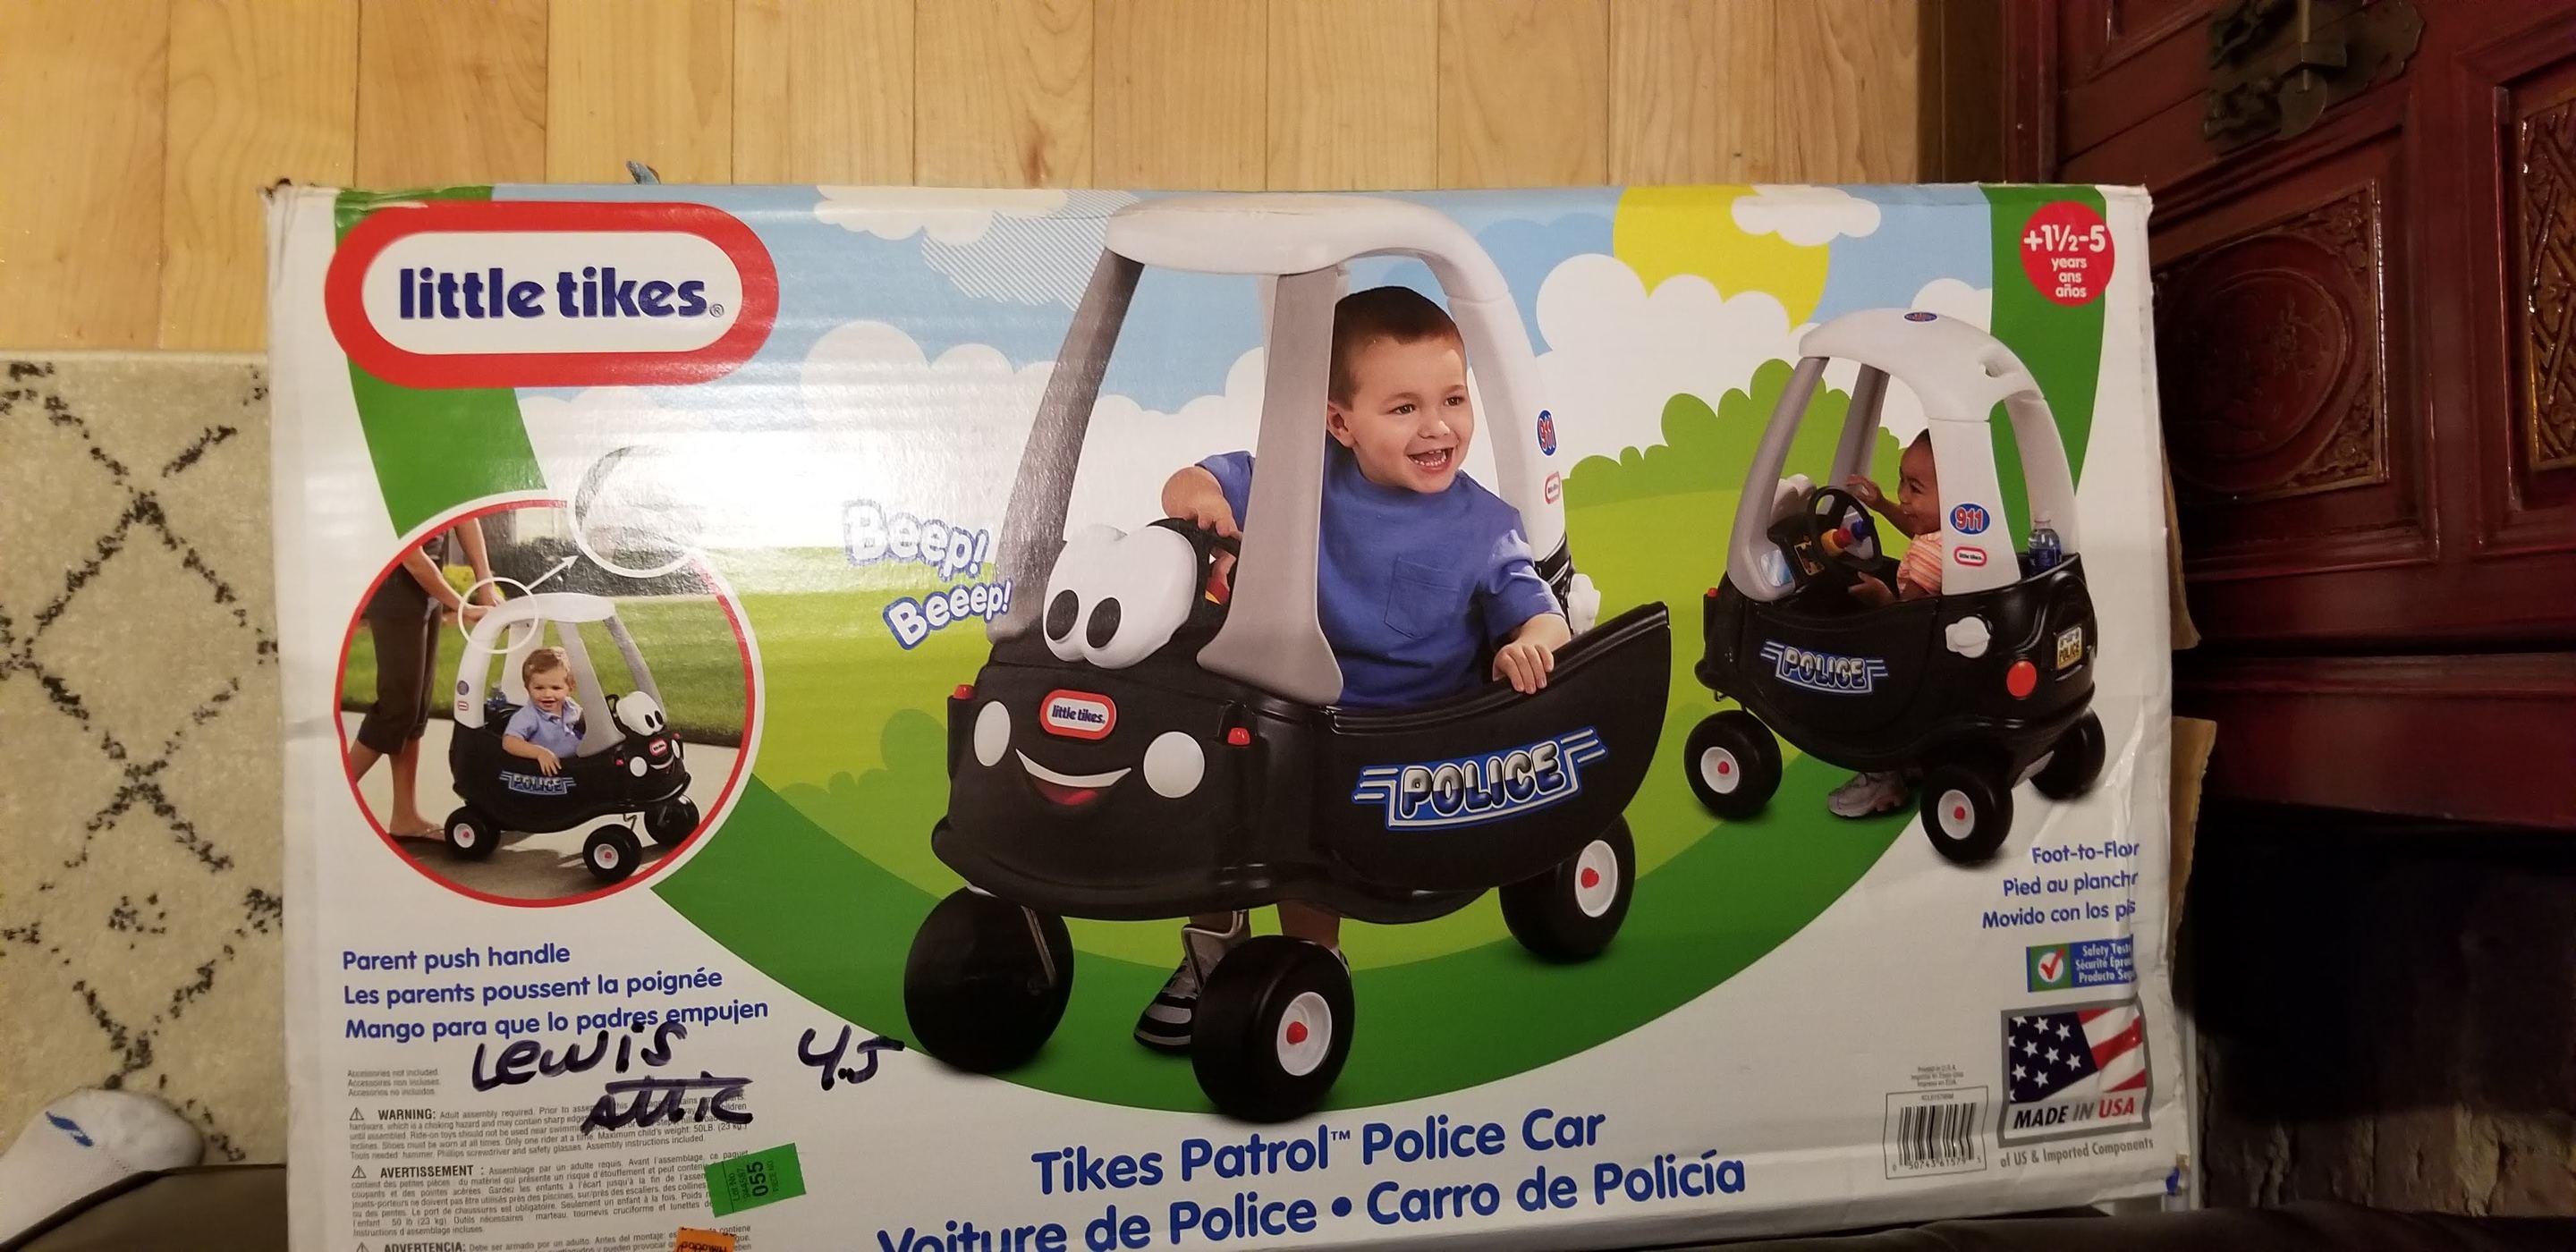 A Little Tikes police car toy found at Goodwill still in the box